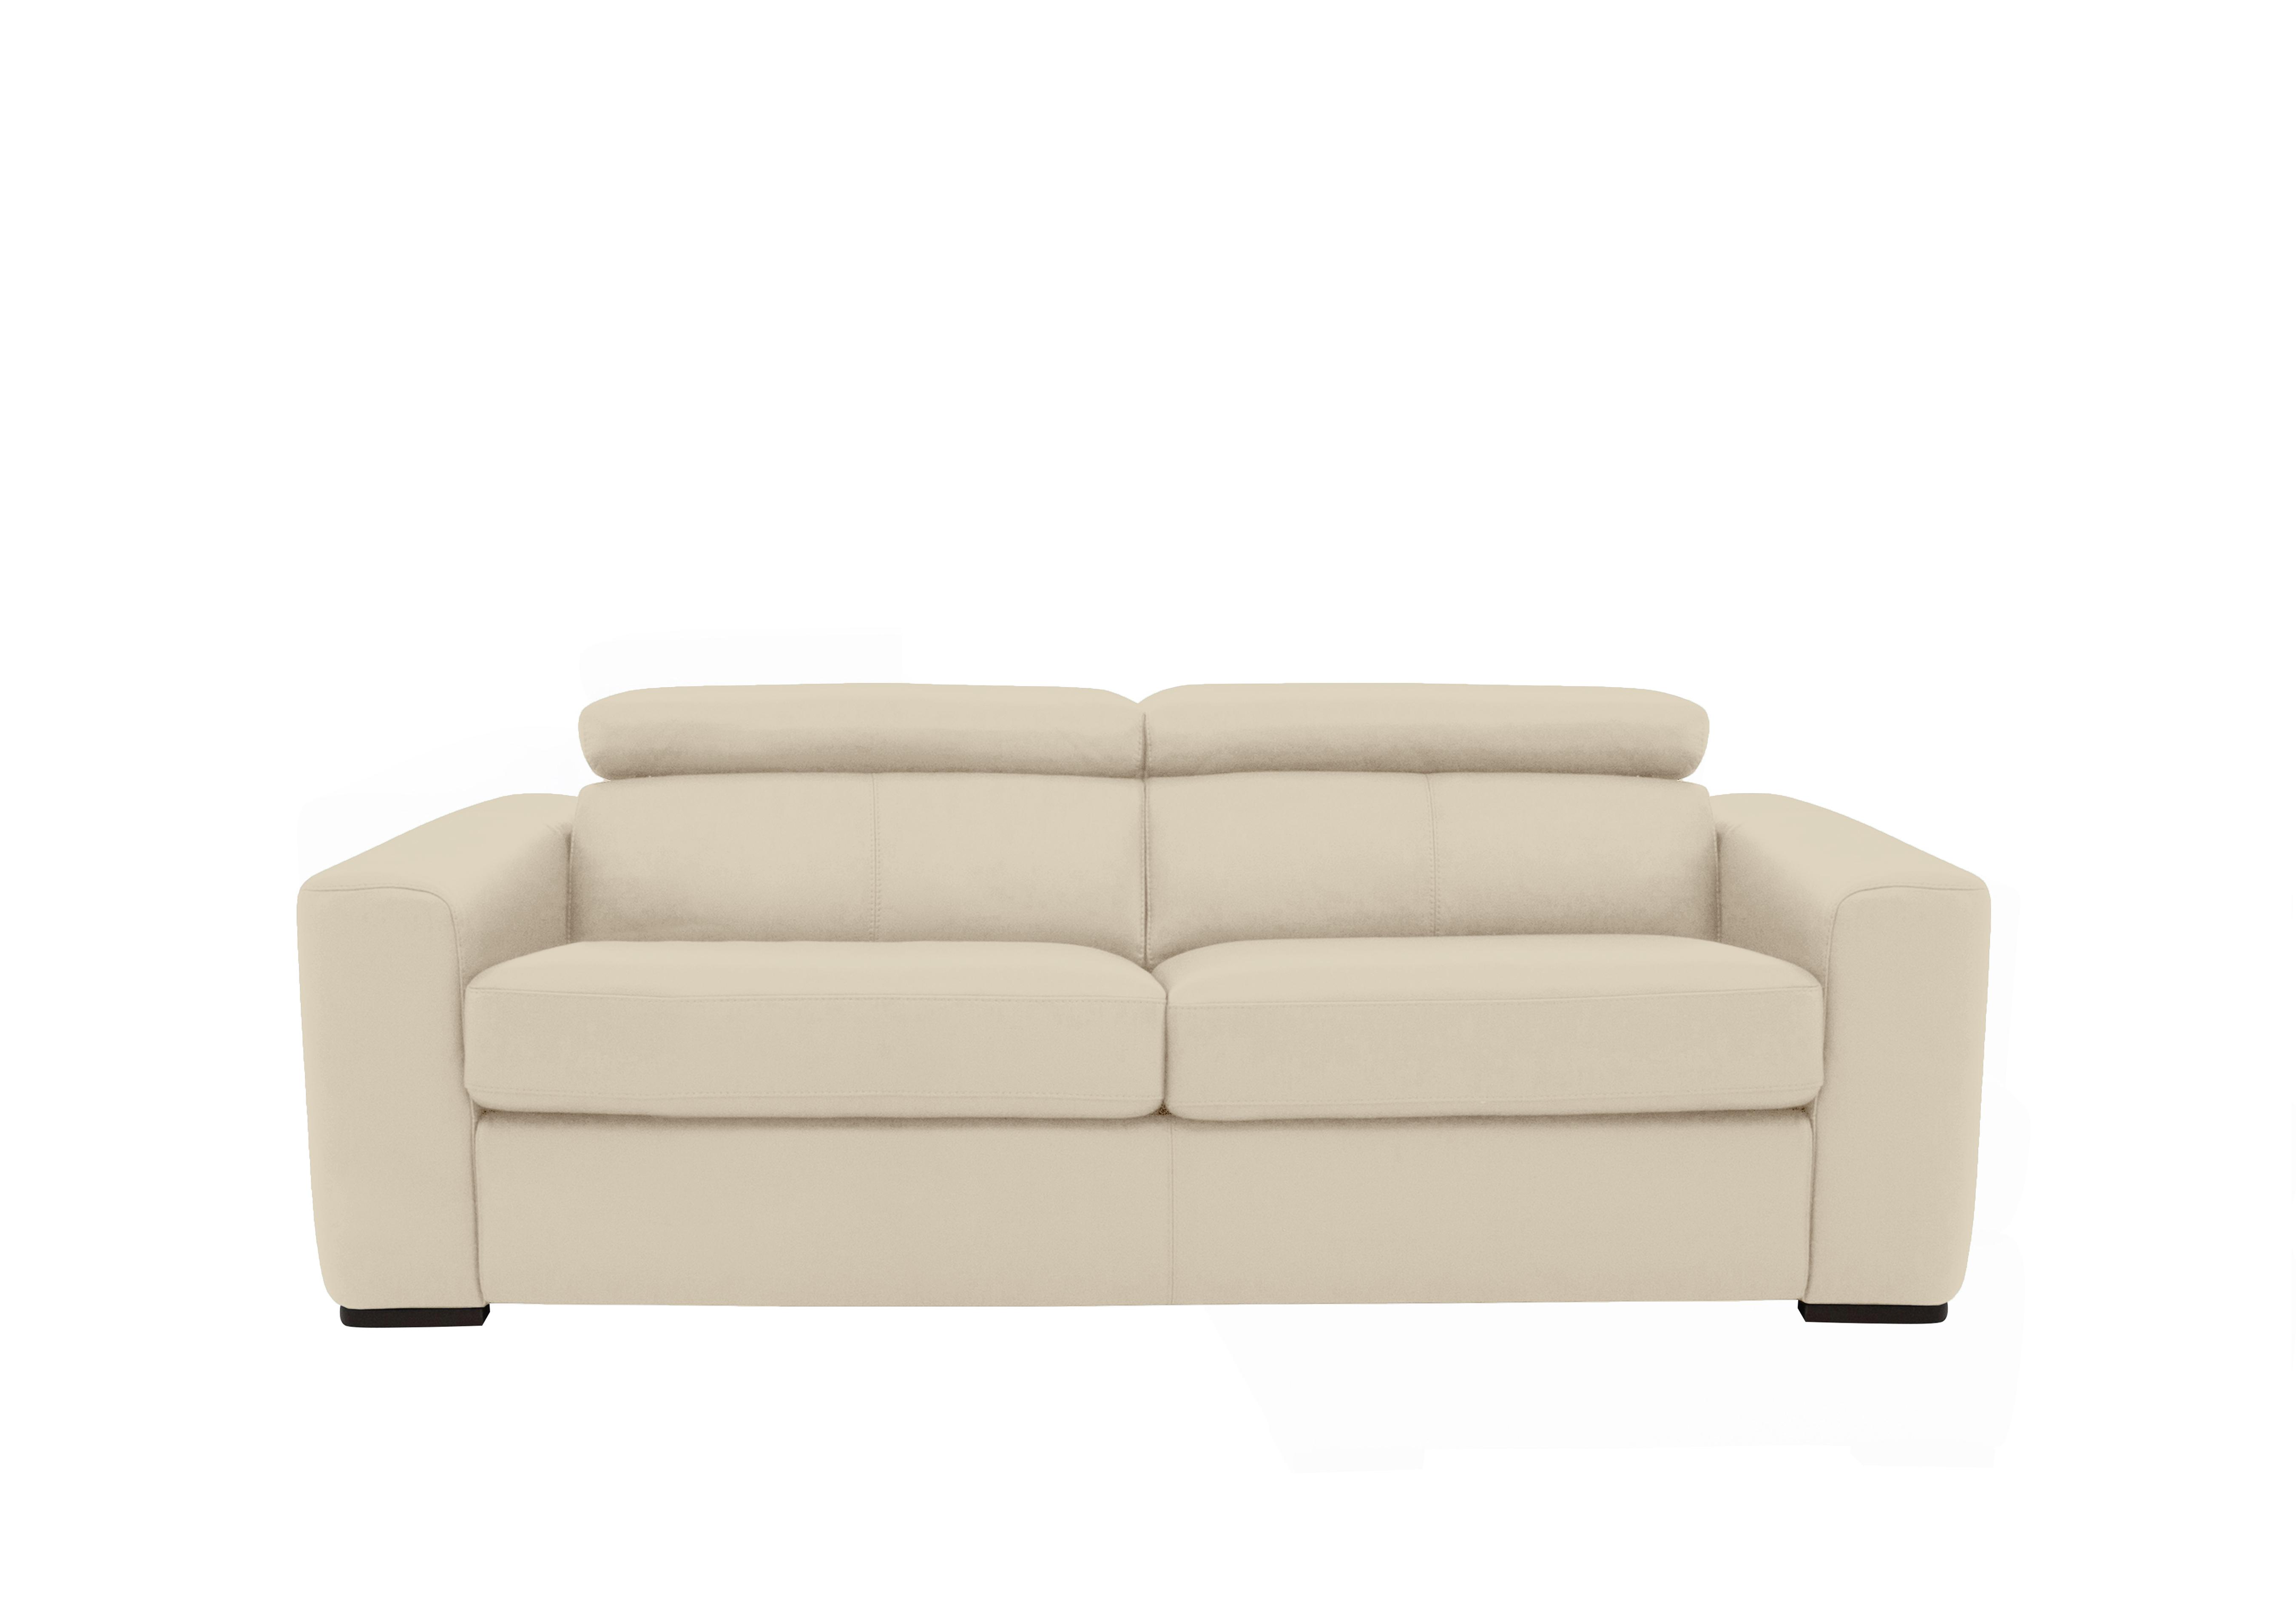 Infinity 3 Seater Leather Sofa in Bv-862c Bisque on Furniture Village